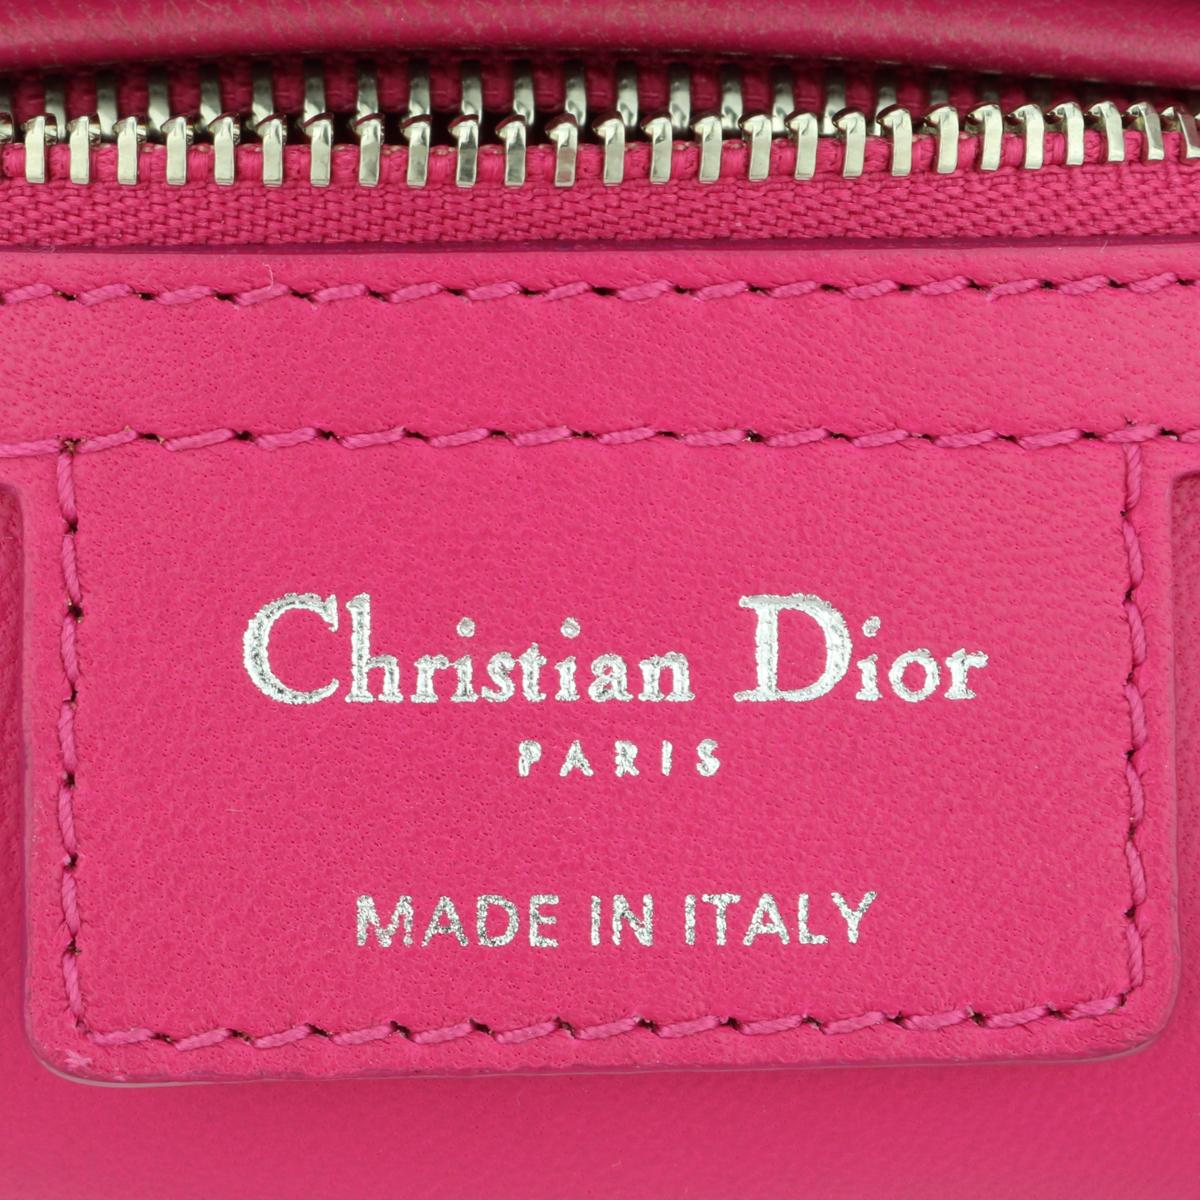 Christian Dior Lady Dior Medium Bag in Pink & Silver Tweed & Leather SHW 2013 For Sale 11